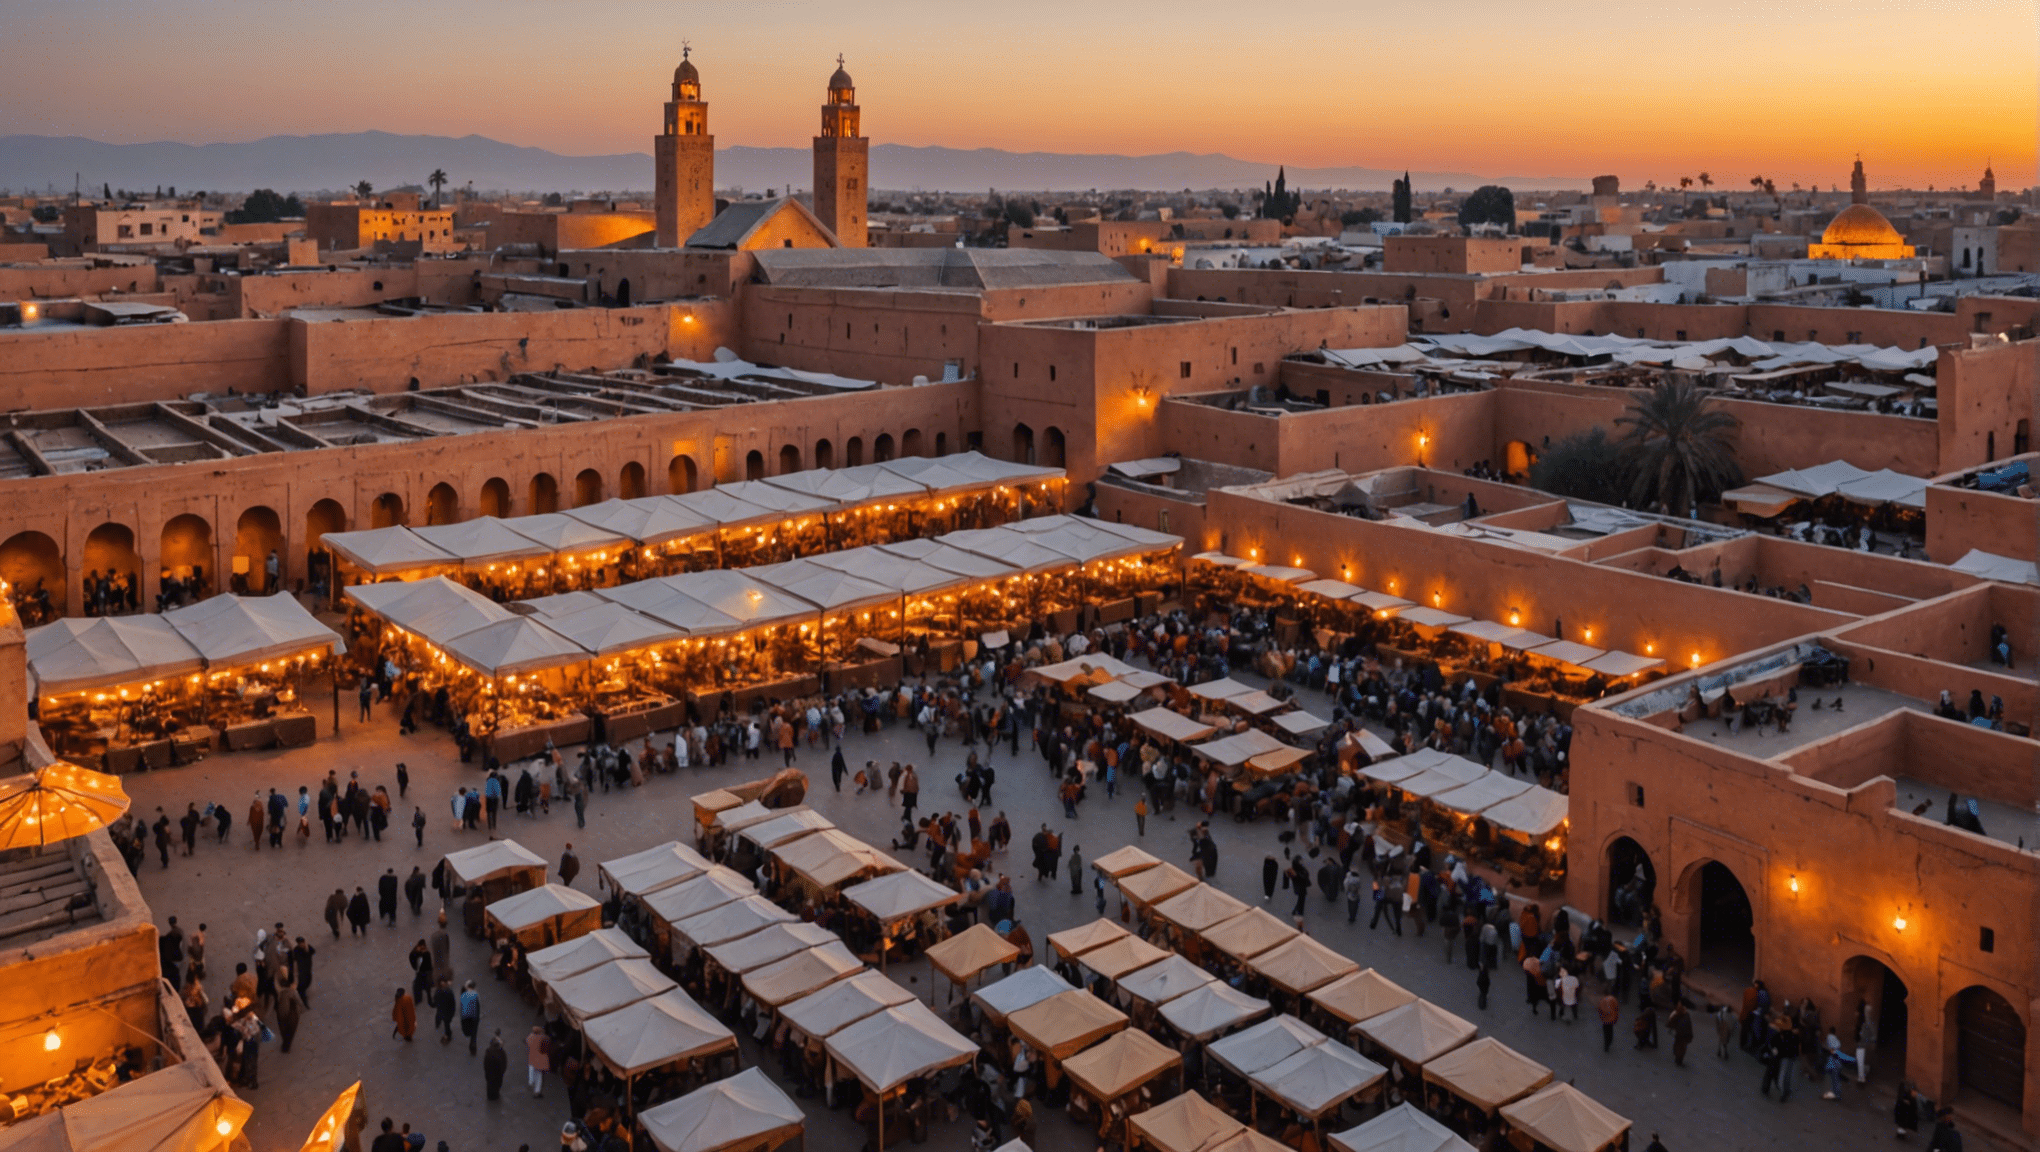 discover if november is the best time to visit marrakech and plan your trip accordingly with this informative guide.